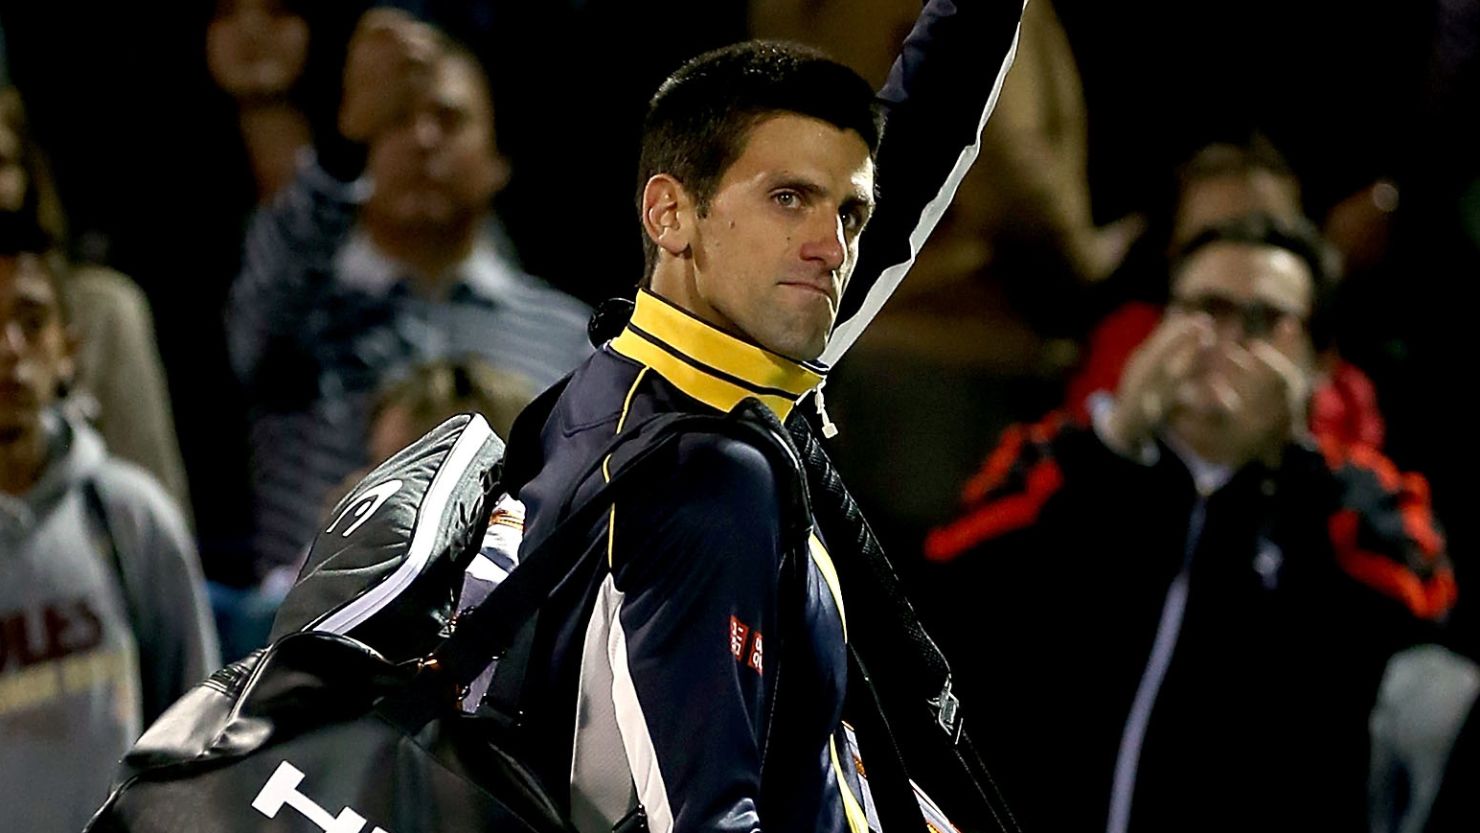 Novak Djokovic's only other defeat of 2013 came against Juan Martin del Potro at Indian Wells.